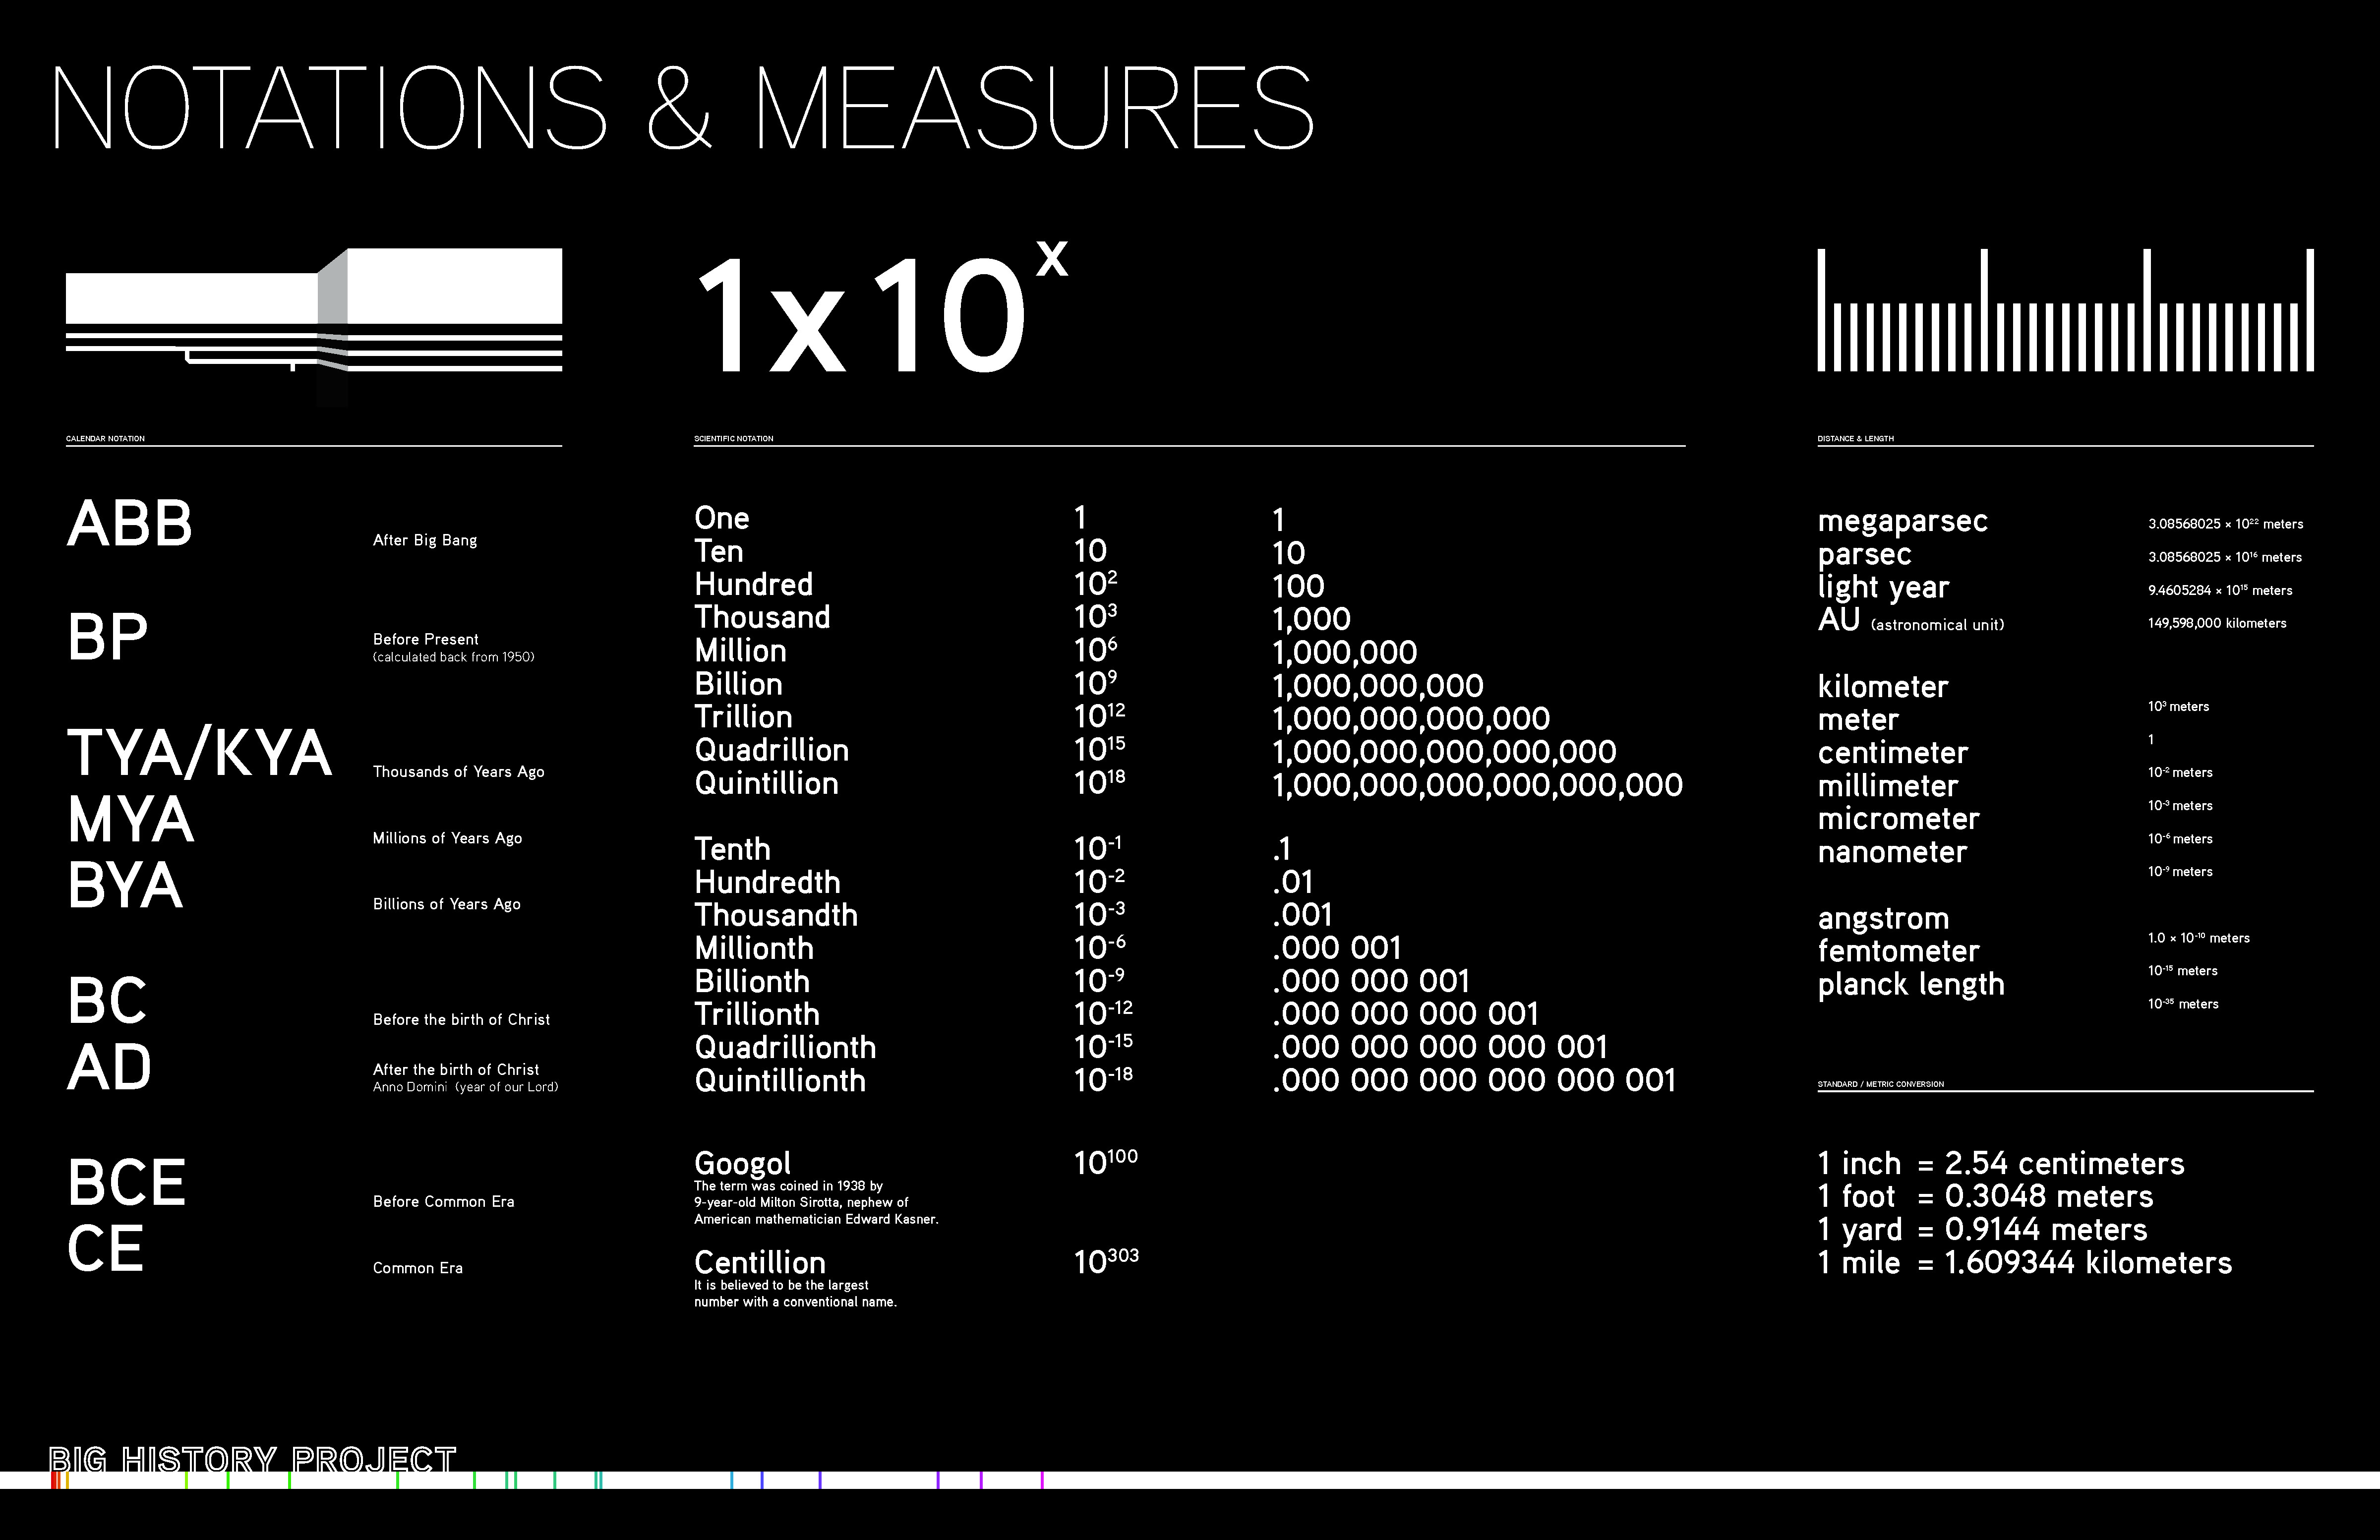 Notations and Measures Infographic